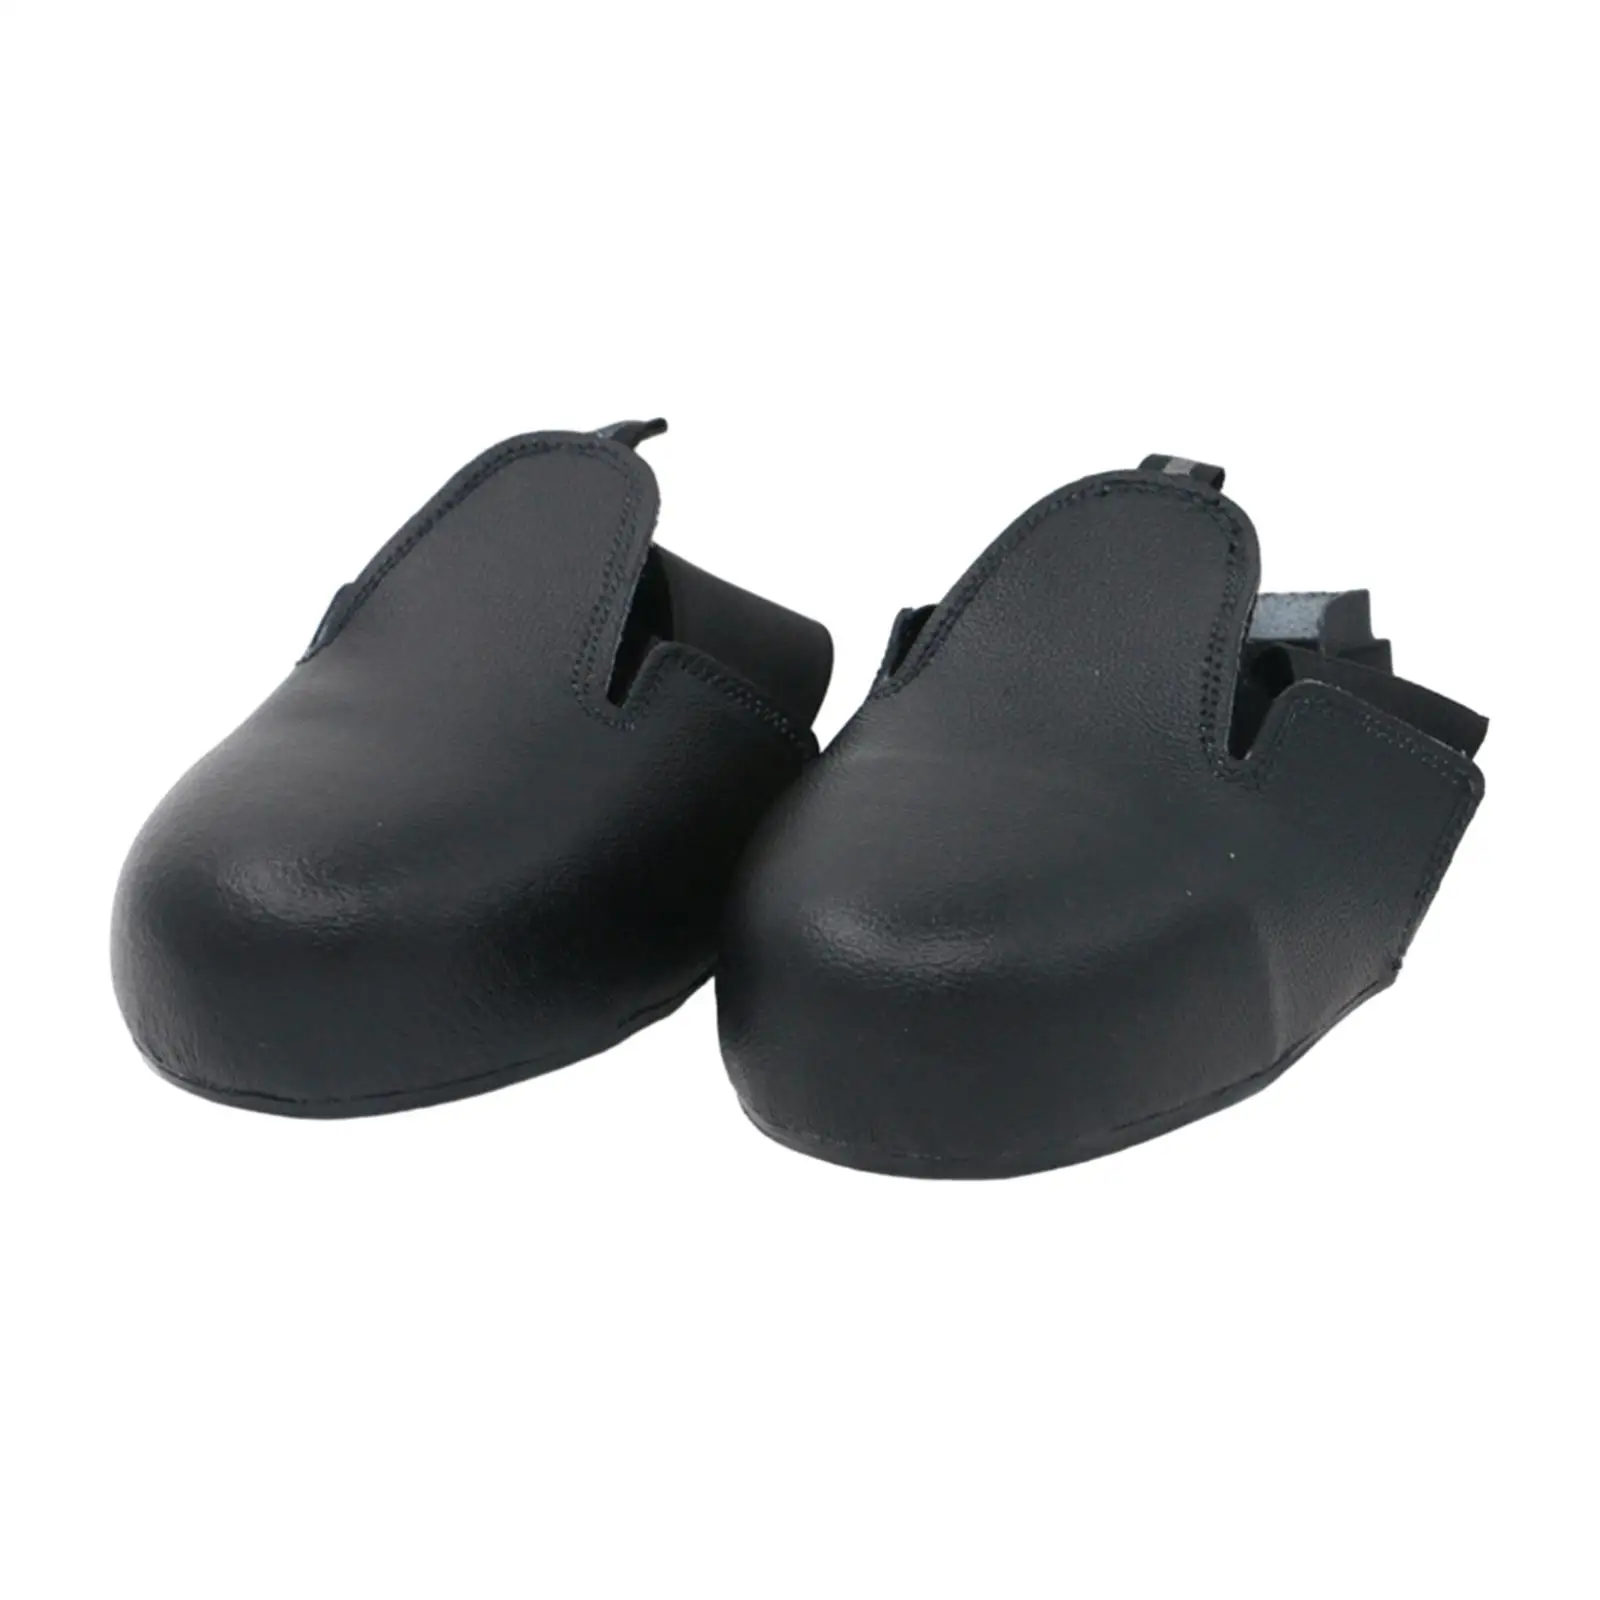 Toe Cap Safety Overshoes Universal Toe Work Shoe Cover Shoe Cap Workplace Anti Smash Cover Anti Smashing PU Leather Shoes Covers